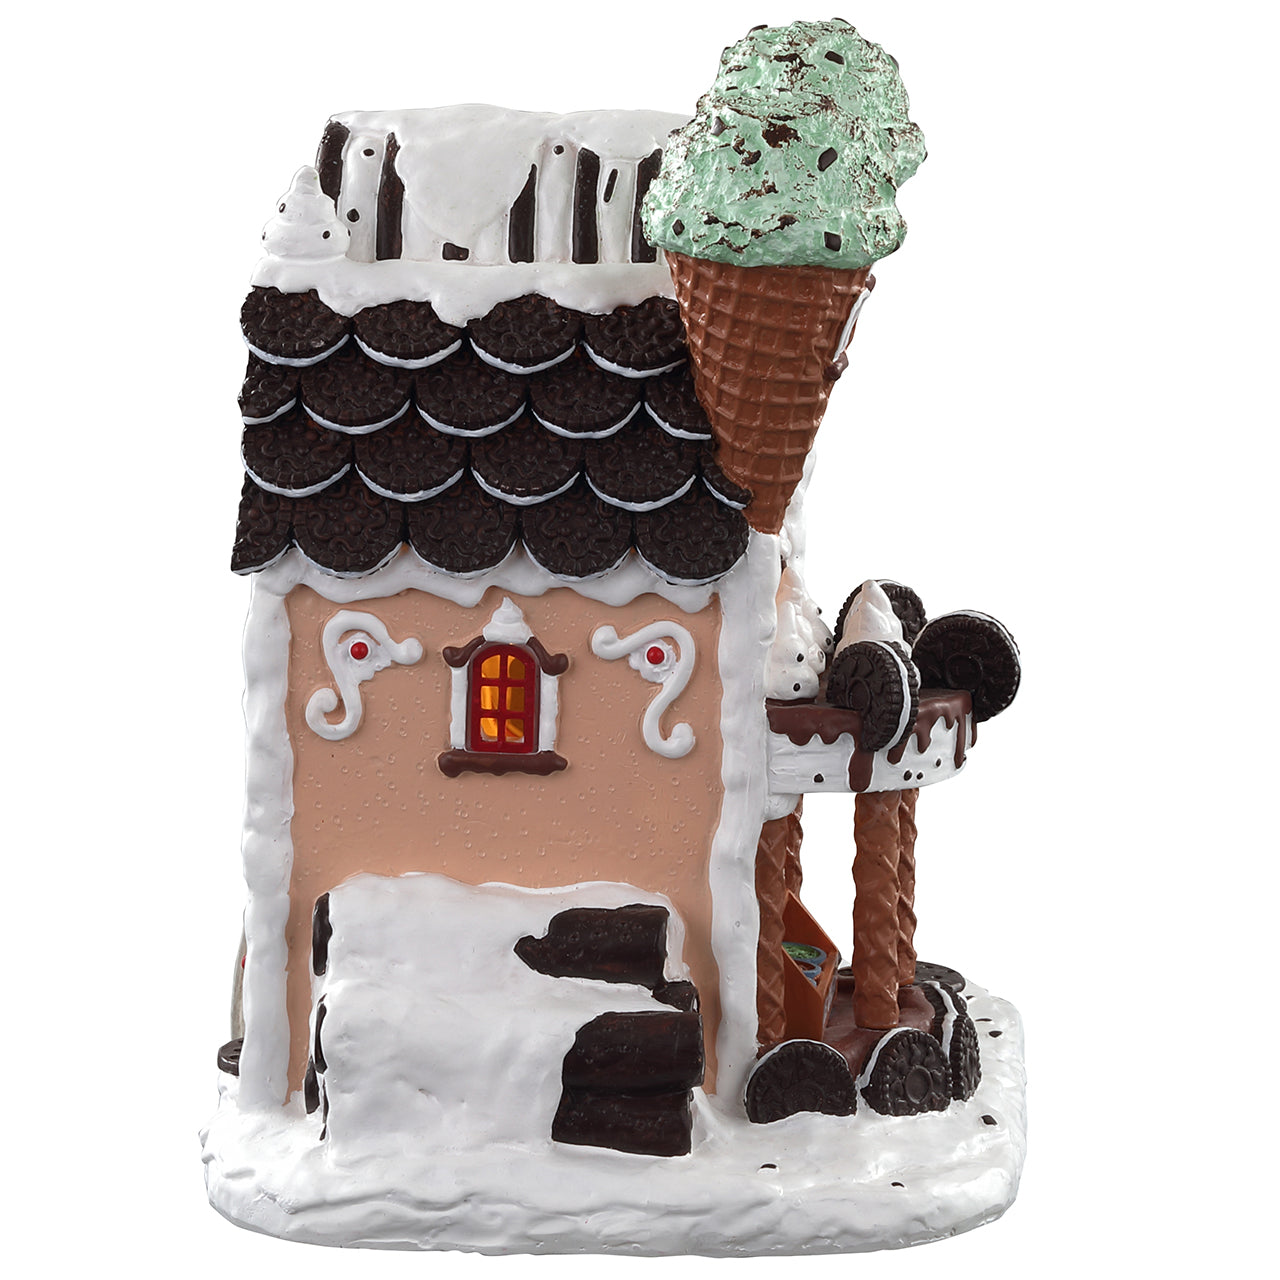 Lemax 05699 Cookie'N Cream Creamery, Standard Lighted Building- Gift Spice